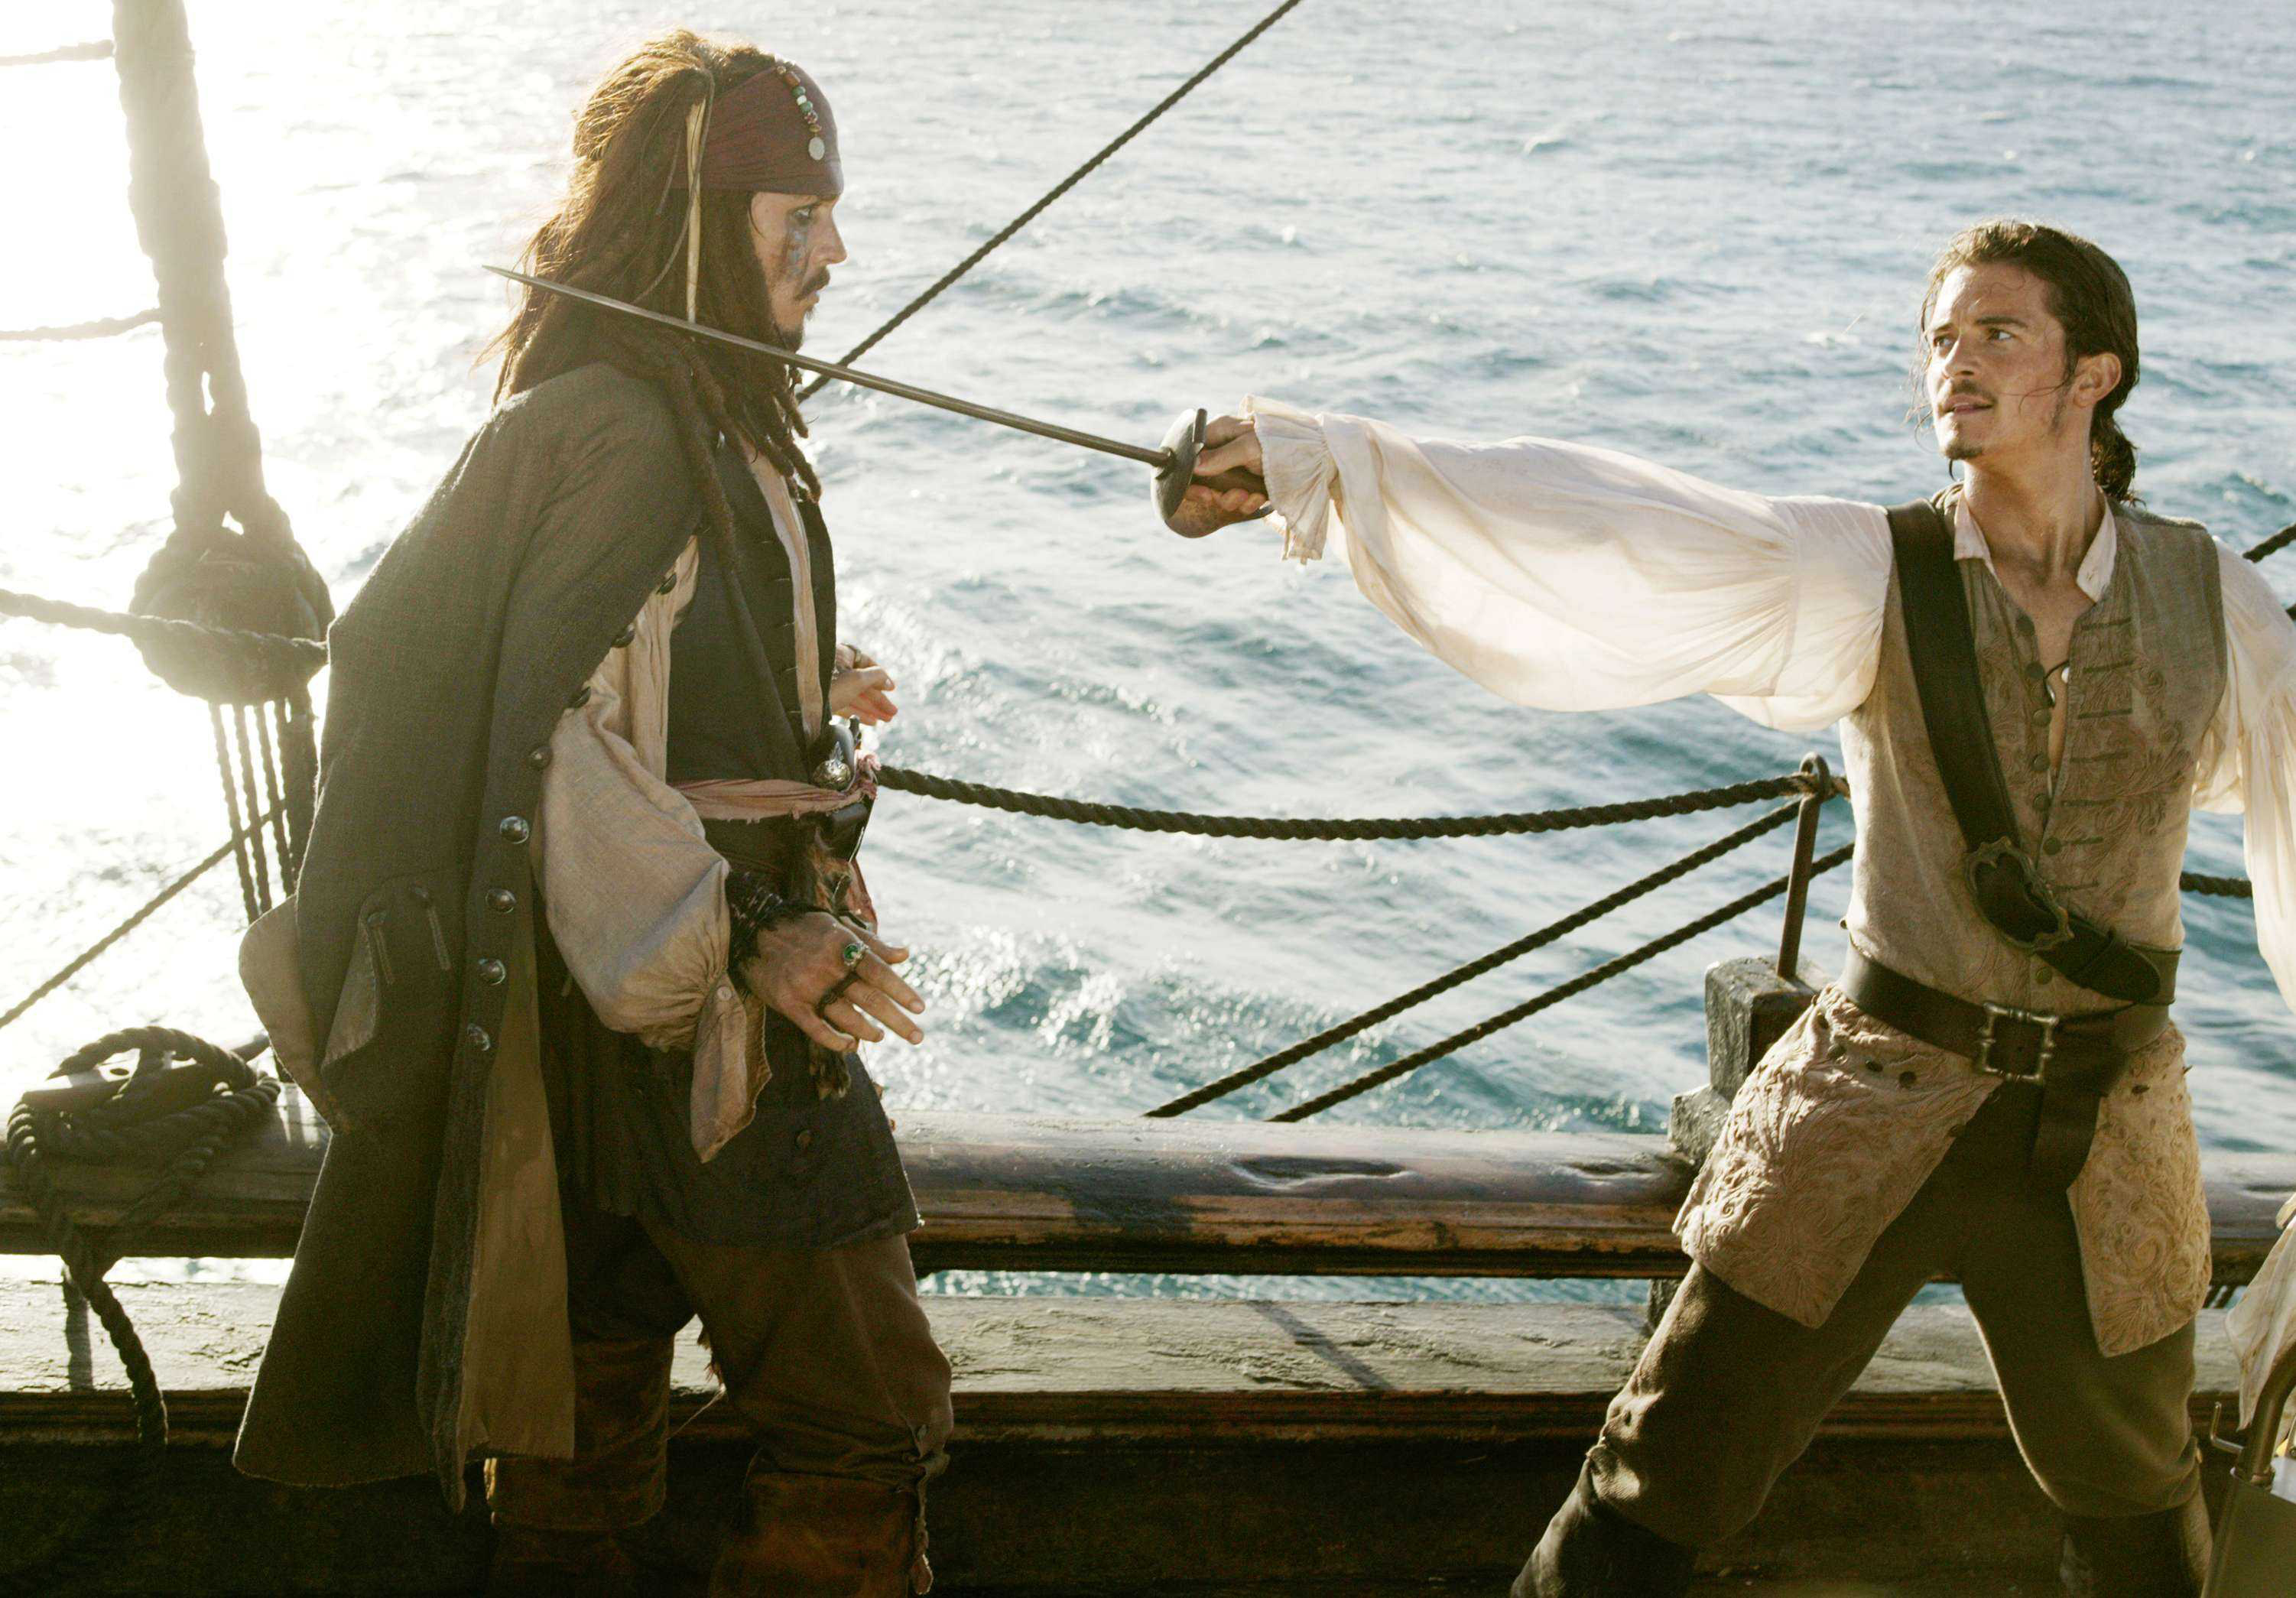 jack sparrow, movie, pirates of the caribbean: dead man's chest, johnny depp, orlando bloom, will turner, pirates of the caribbean